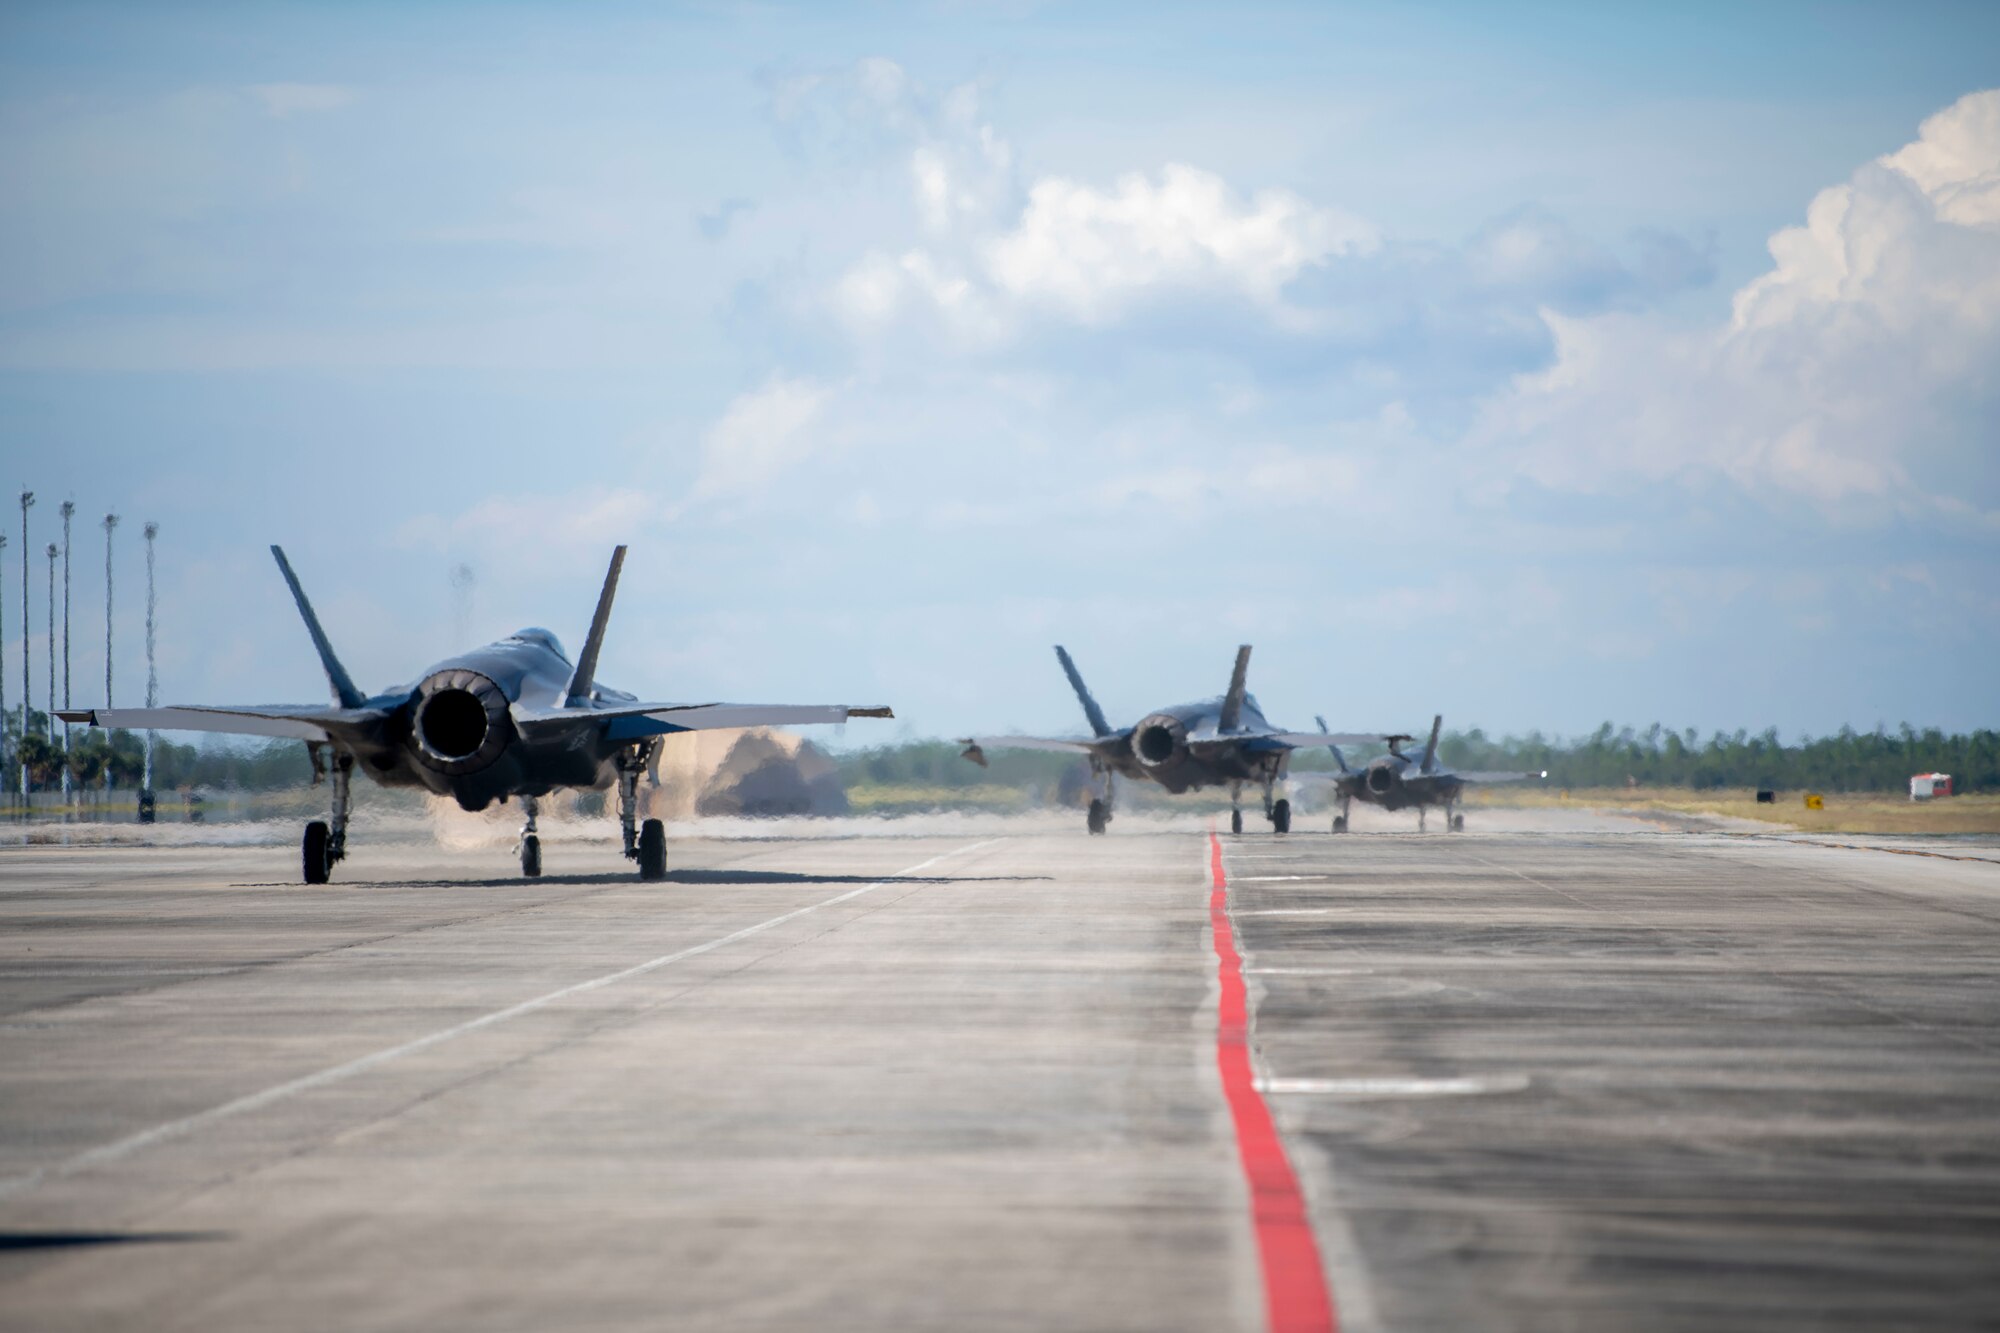 Multiple U.S. Air Force F-35 Lightning II aircraft, assigned to the 354th Fighter Wing, Eielson Air Force Base, Alaska, taxi in preparation for takeoff at Tyndall AFB, Florida, Oct. 15, 2021. The 356th Fighter Squadron participated in the 53rd Weapons Evaluation Group’s Weapons System Evaluation Program, which is an exercise held regularly to evaluate units on combat capabilities during air-to-air operations. (U.S. Air Force photo by Airman 1st Class Tiffany Price)